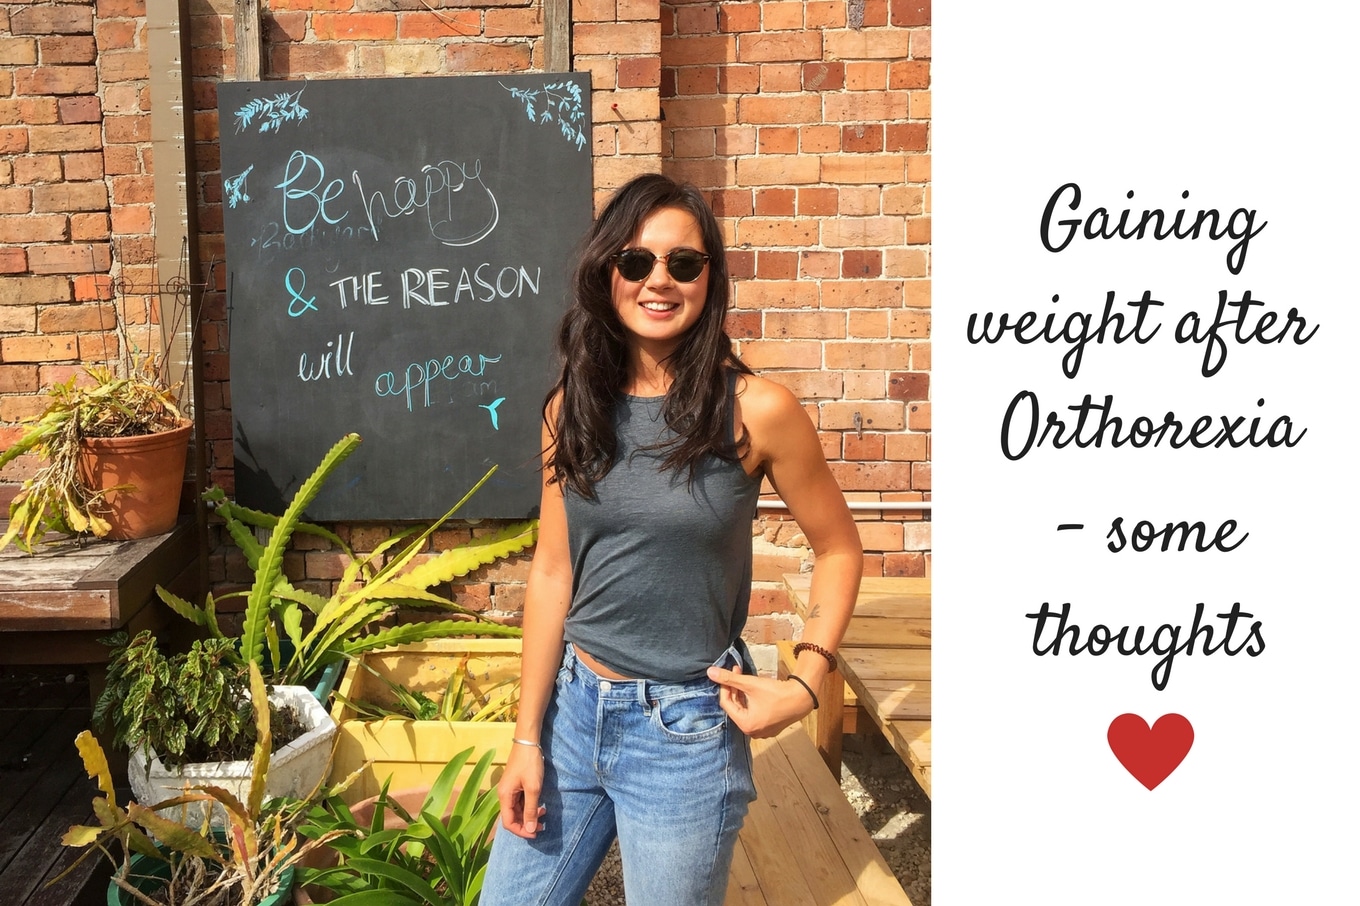 New on the blog: Gaining weight after orthorexia - my thoughts. Some positive messages after my own experience. Read it over on nourisheveryday.com!